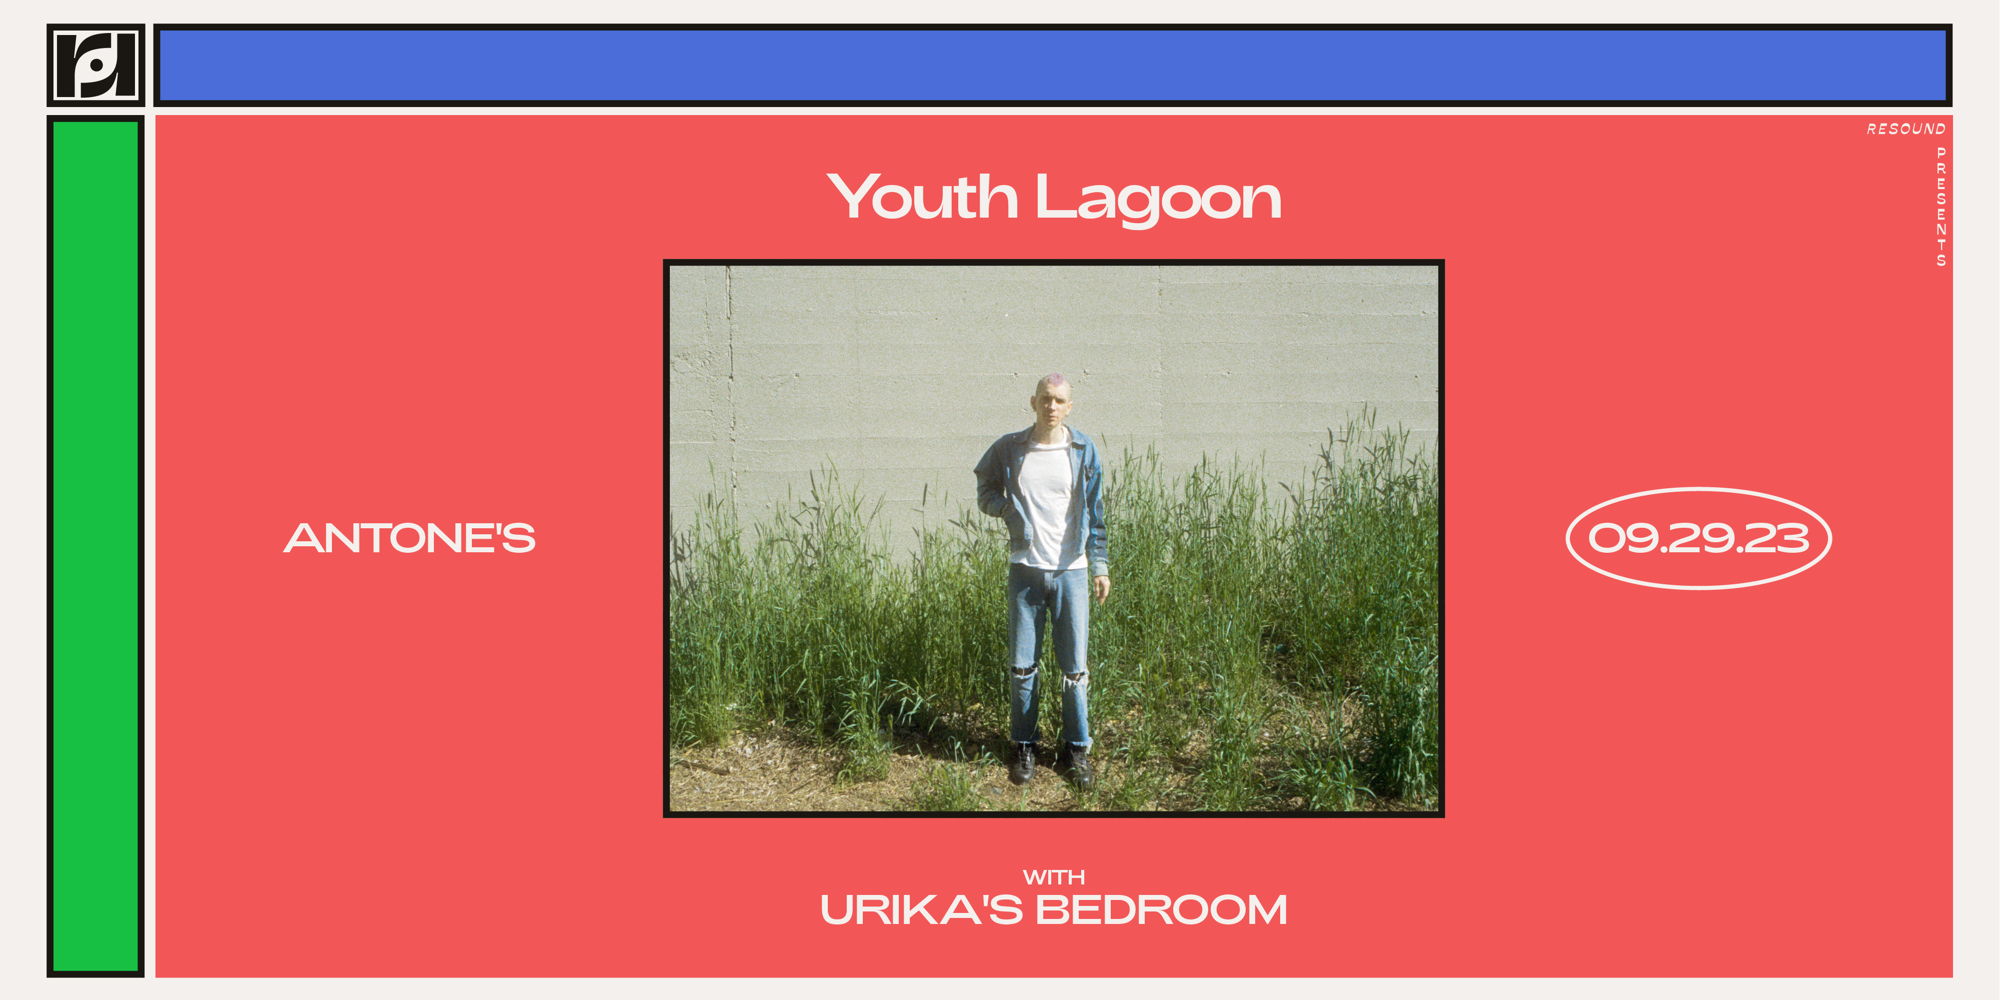 Youth Lagoon W/ Urika's Bedroom at Antone's on 9/29 promotional image